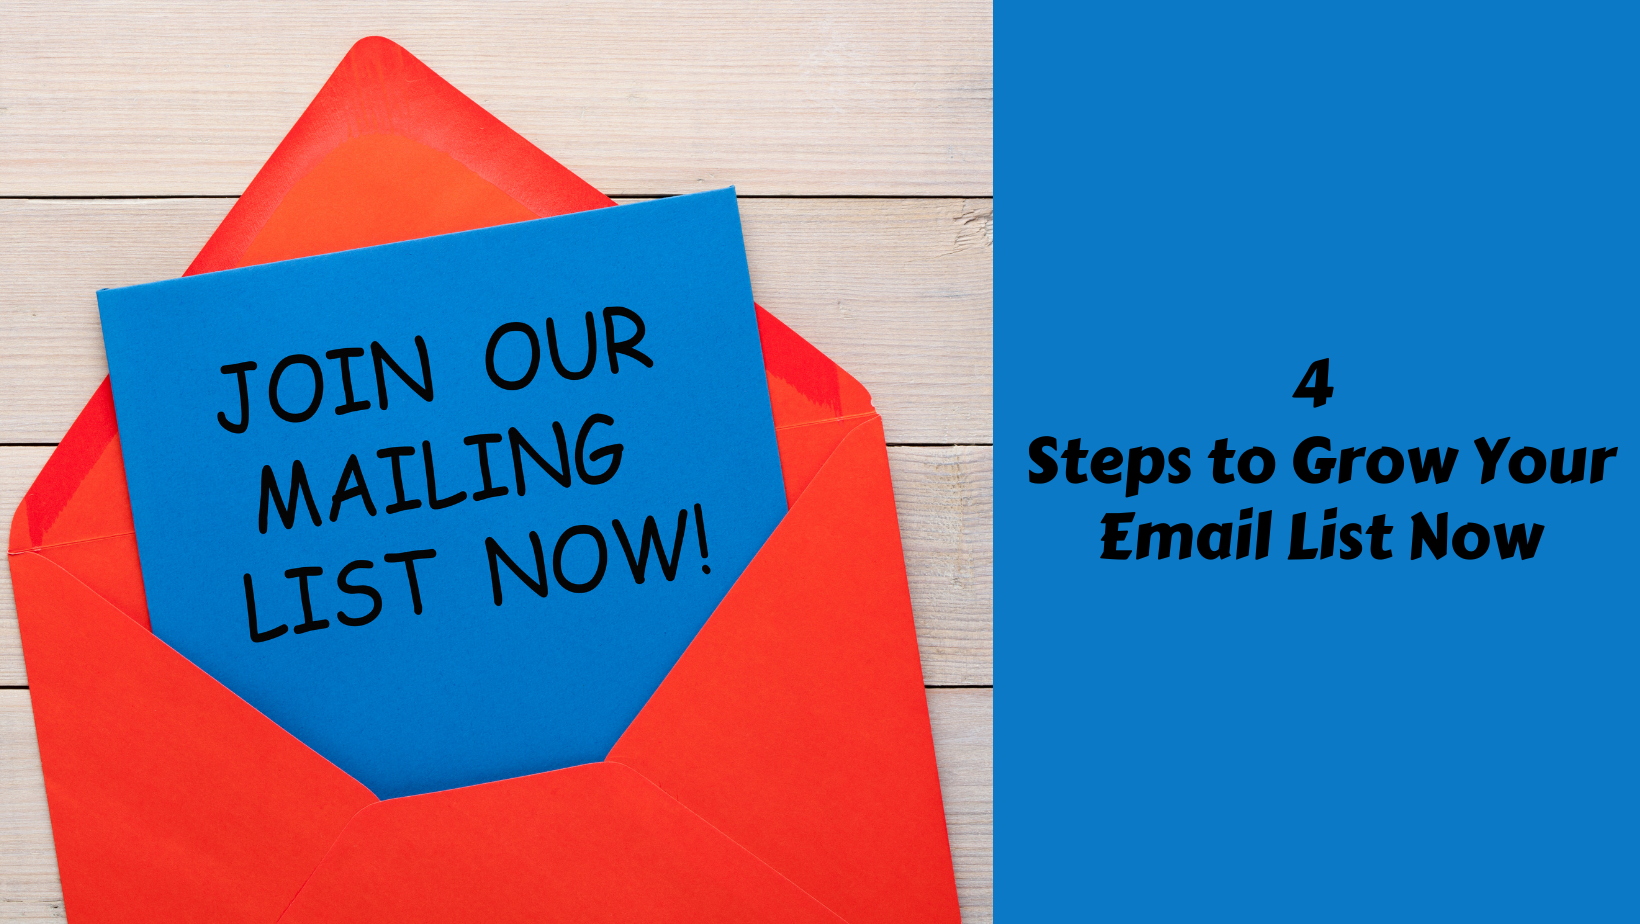 4 Steps to Grow Your Email List Now